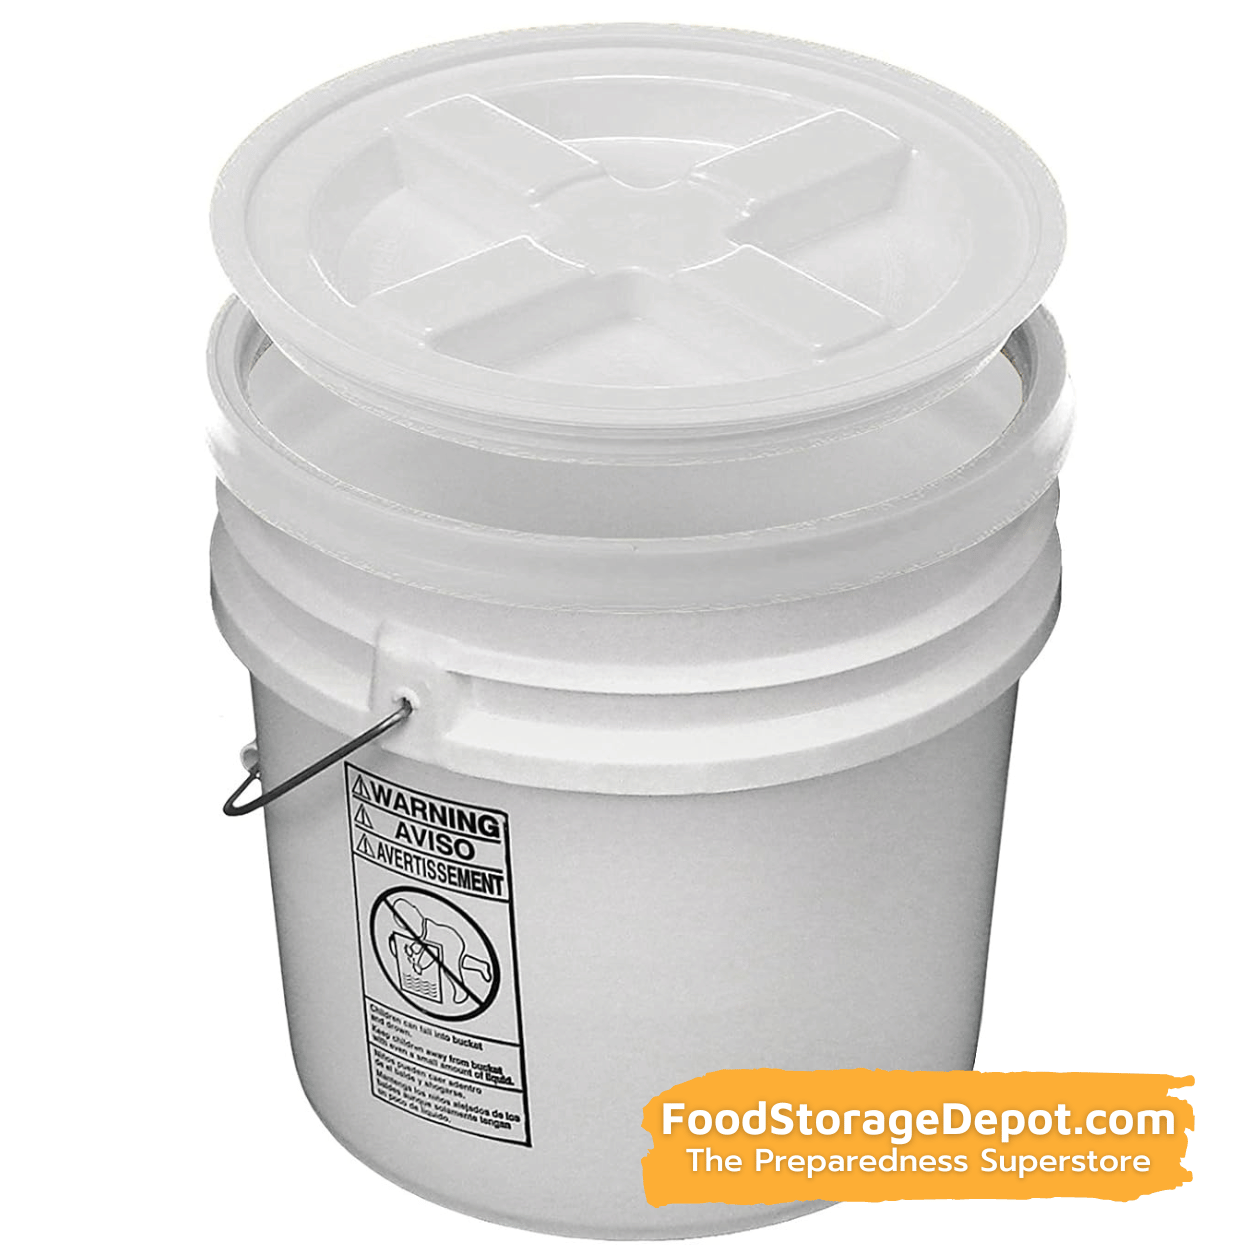 Reusable Twist Lid for Storage Container Bucket - 5 Gallon